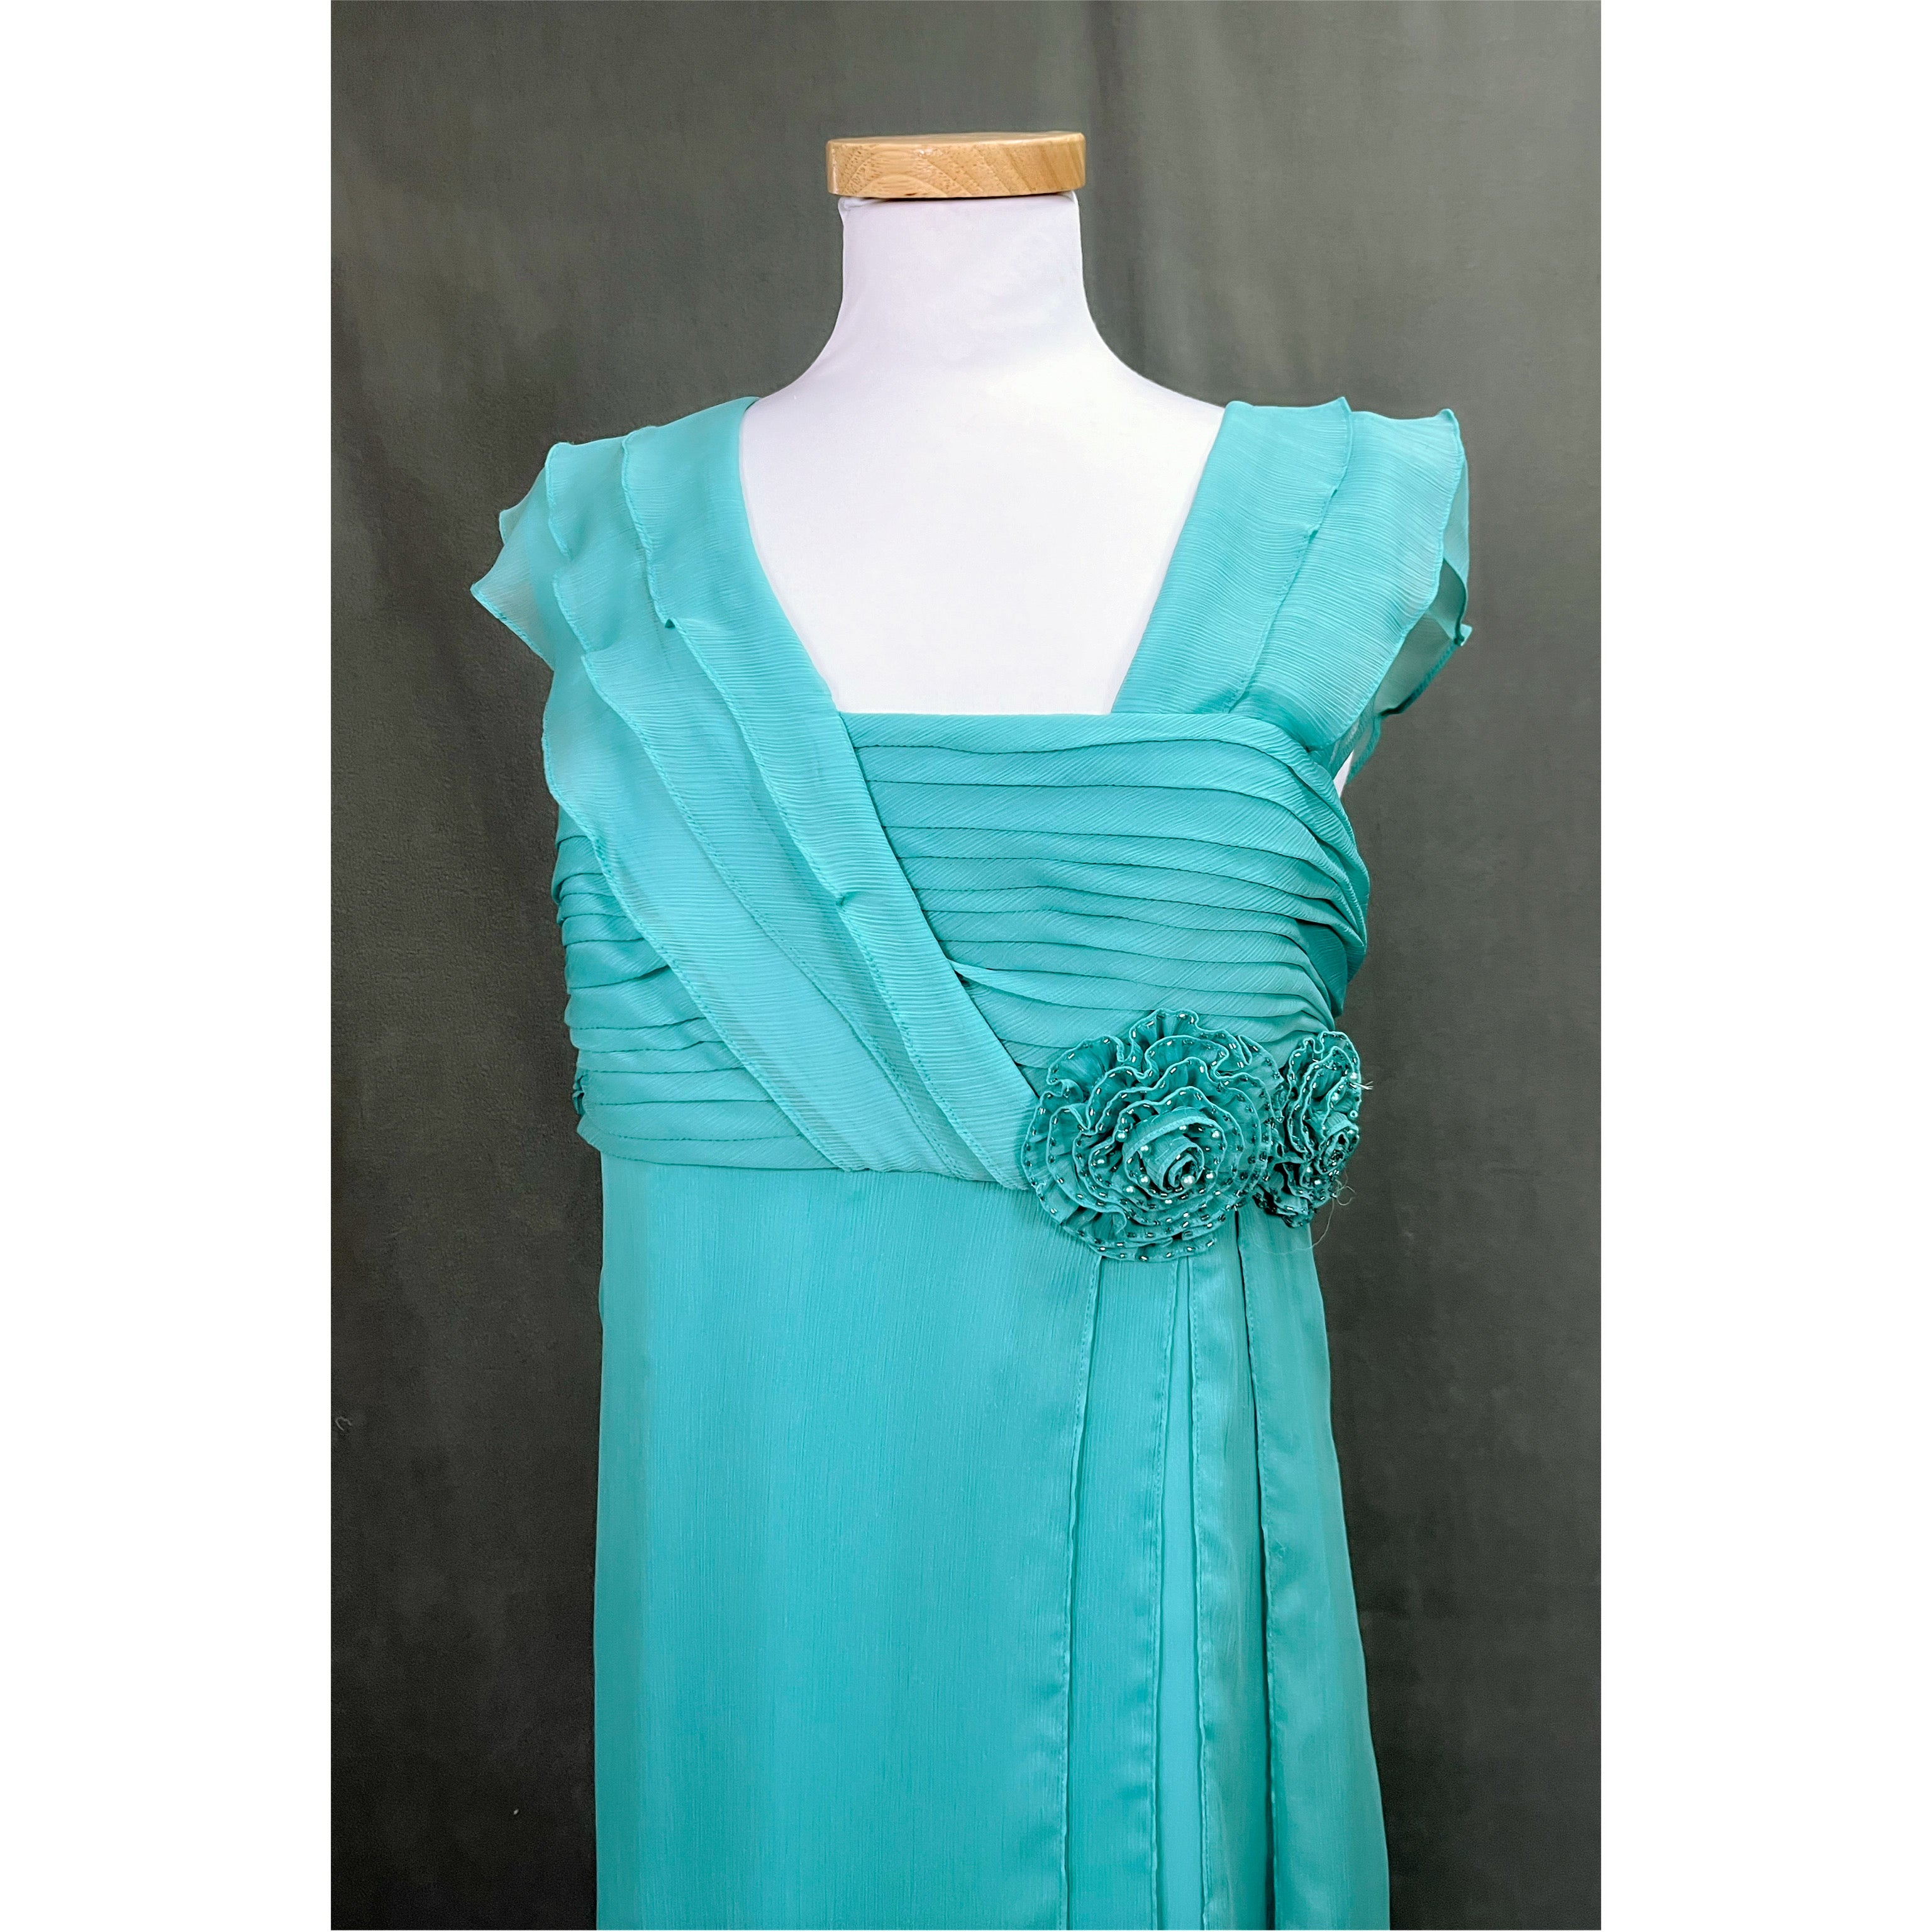 KM Collections aqua dress, size 16, NEW WITH TAGS!